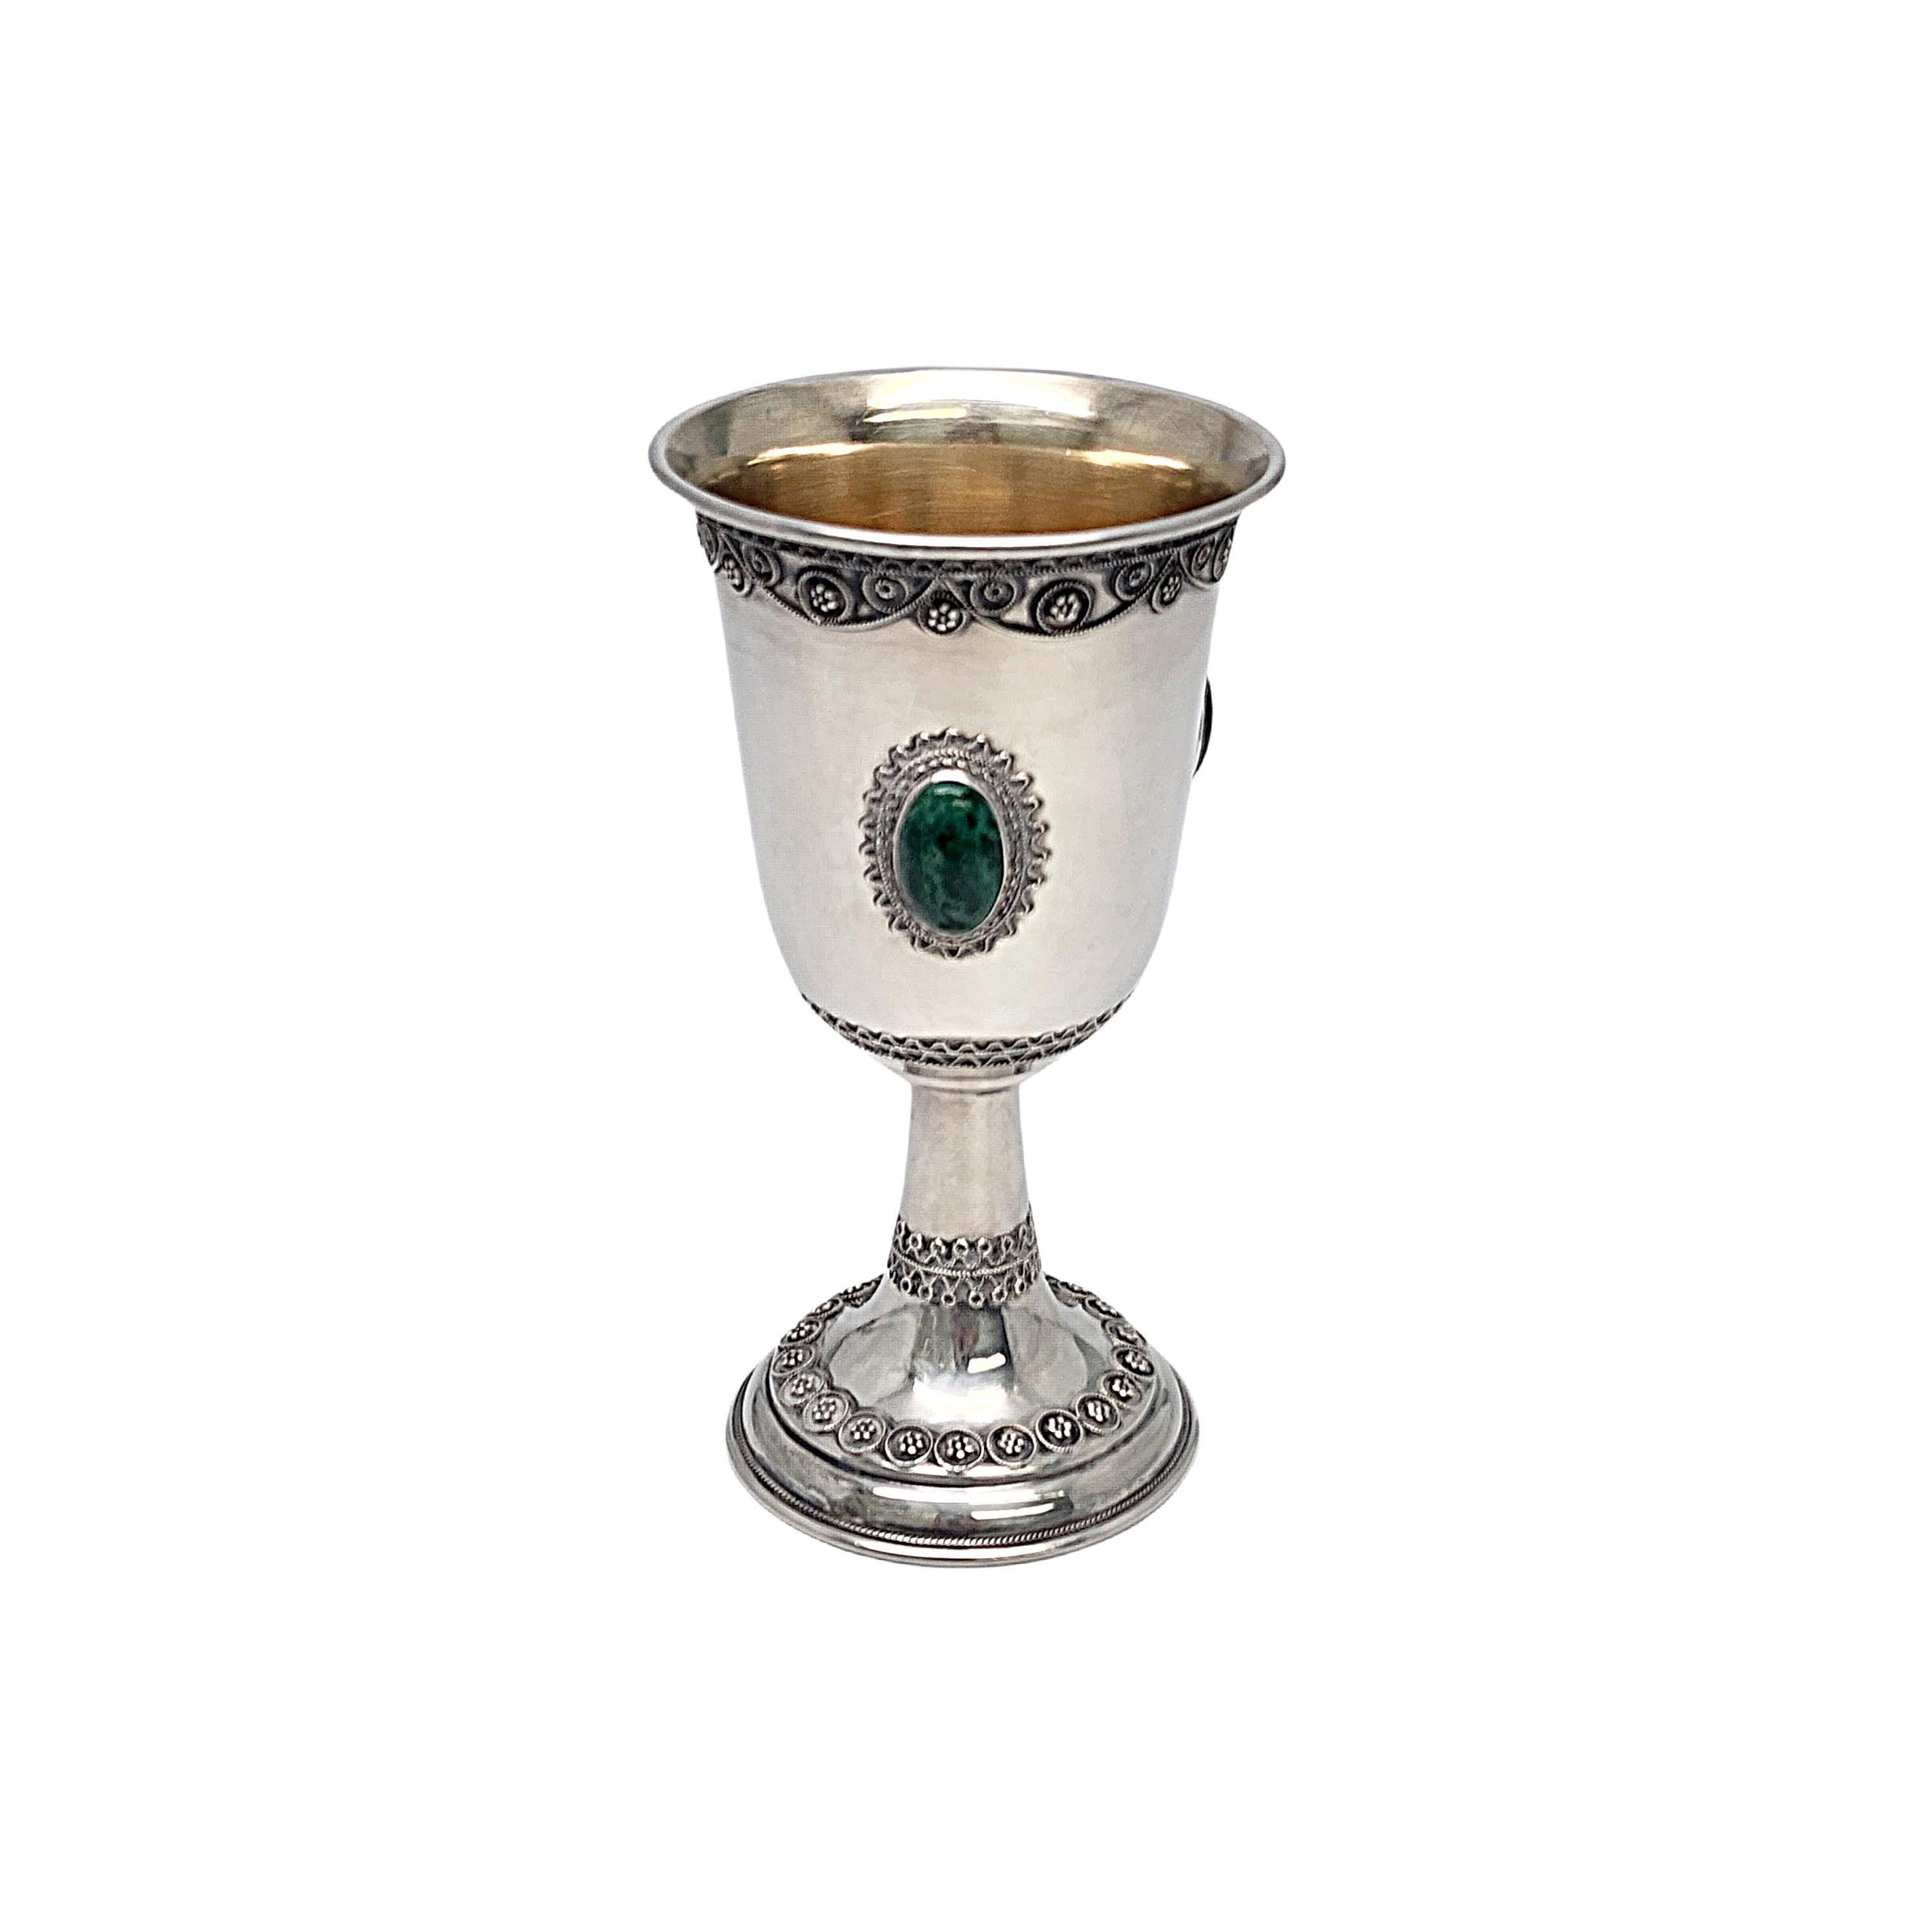 Sterling silver with gold wash interior Eliat stone kiddush cup goblet by Zadok of Israel.

No monograms or engraving.

With a gold wash cup interior, this cup/goblet features 3 bezel set green eliat stones and ornate filigree design accents. Eliat